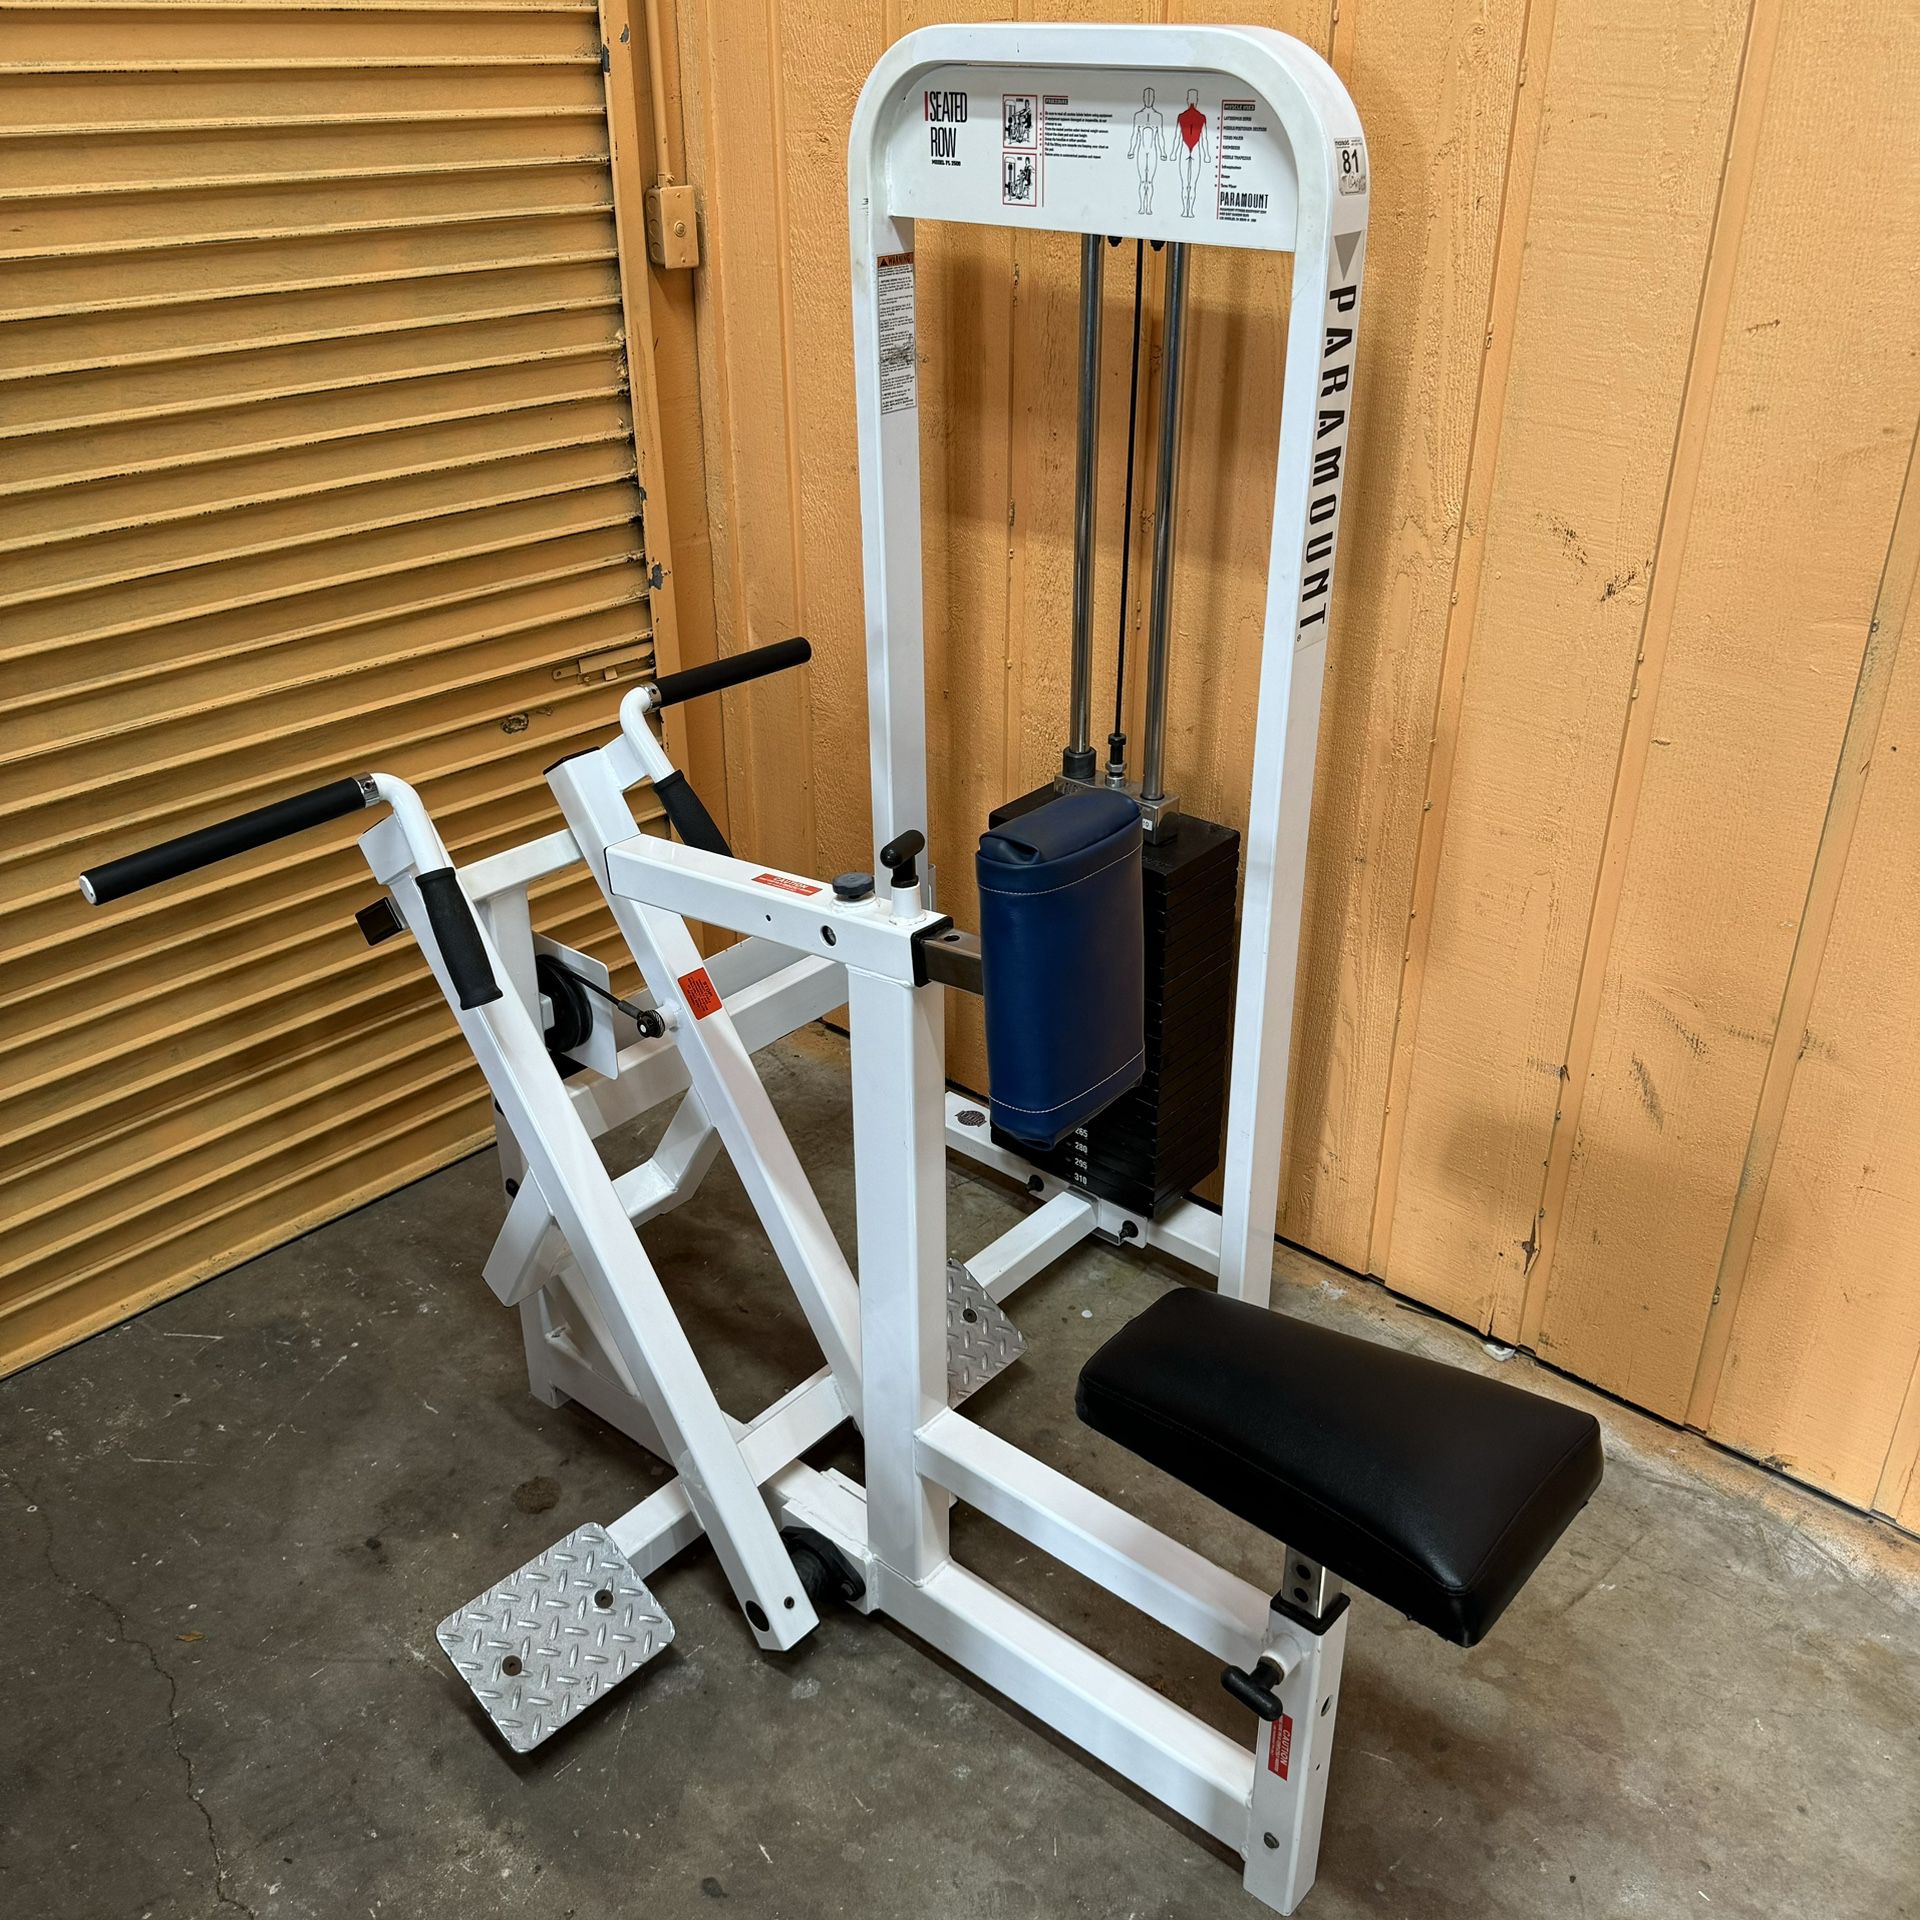 Paramount PL2500 Seated Row- Massive 310 Lb Stack- Commercial Gym Equipment